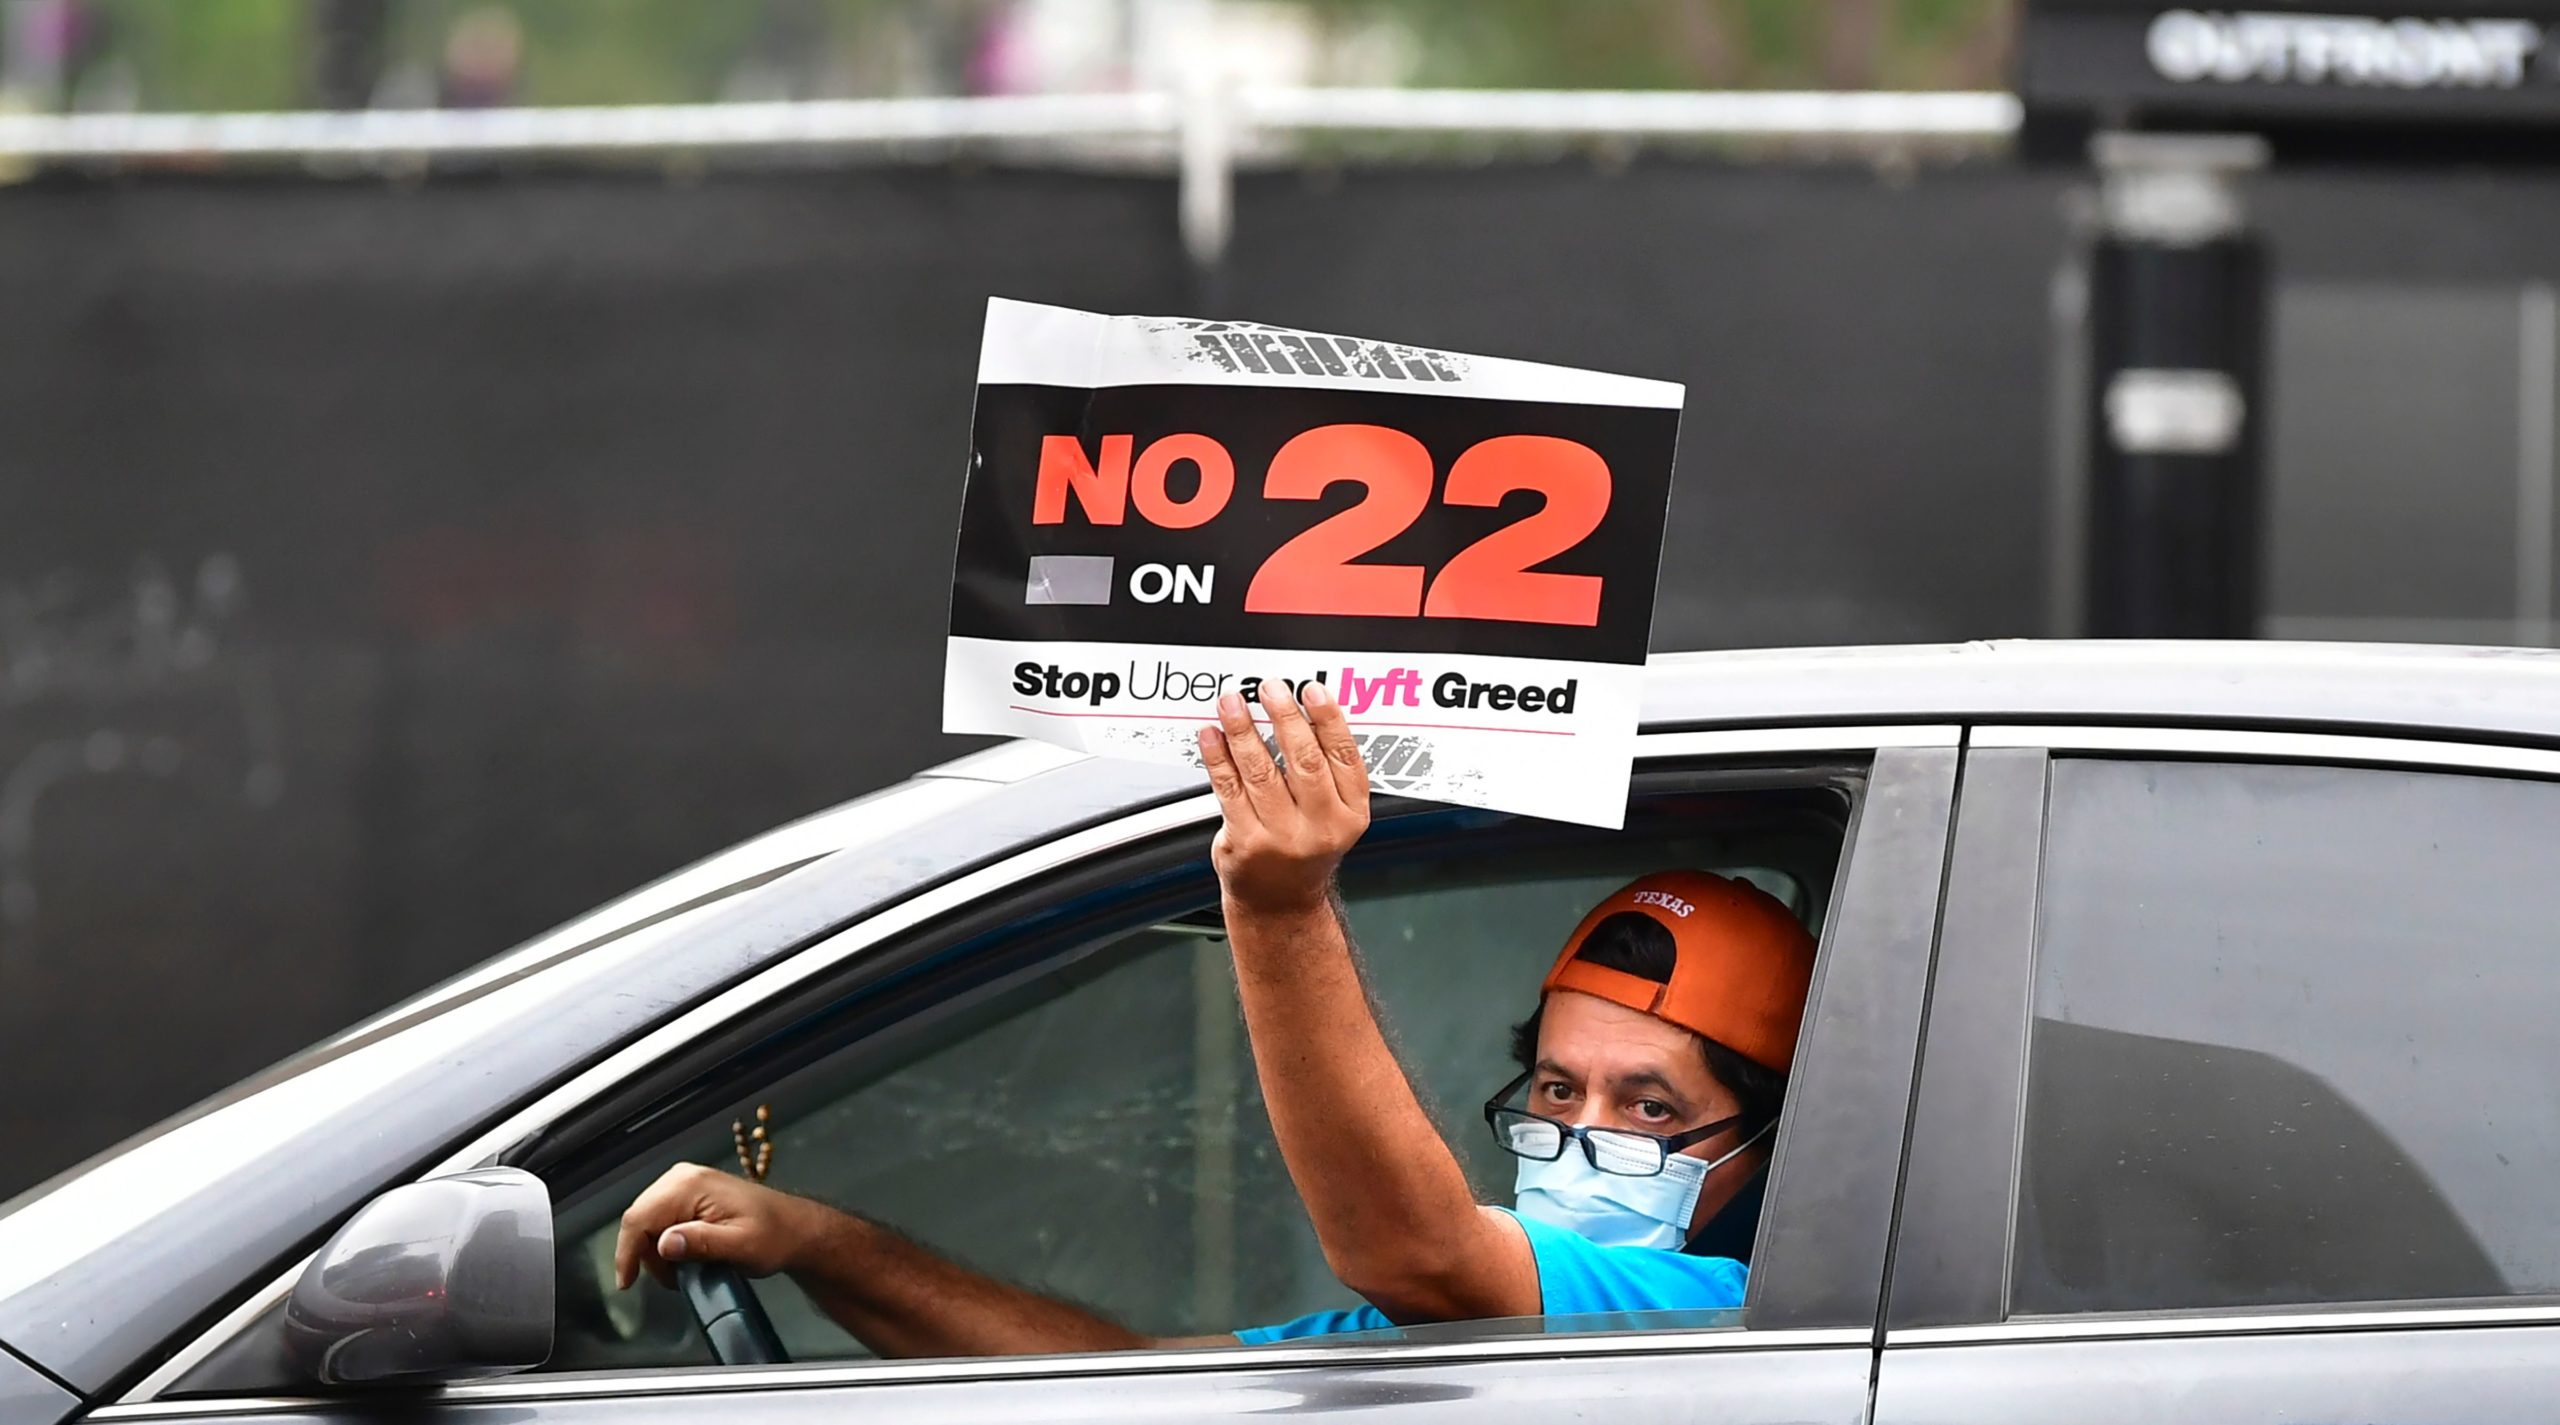 App-based drivers from Uber and Lyft protest in a caravan in front of City Hall in Los Angeles on Oct. 22. (Frederic J. Brown/AFP via Getty Images)